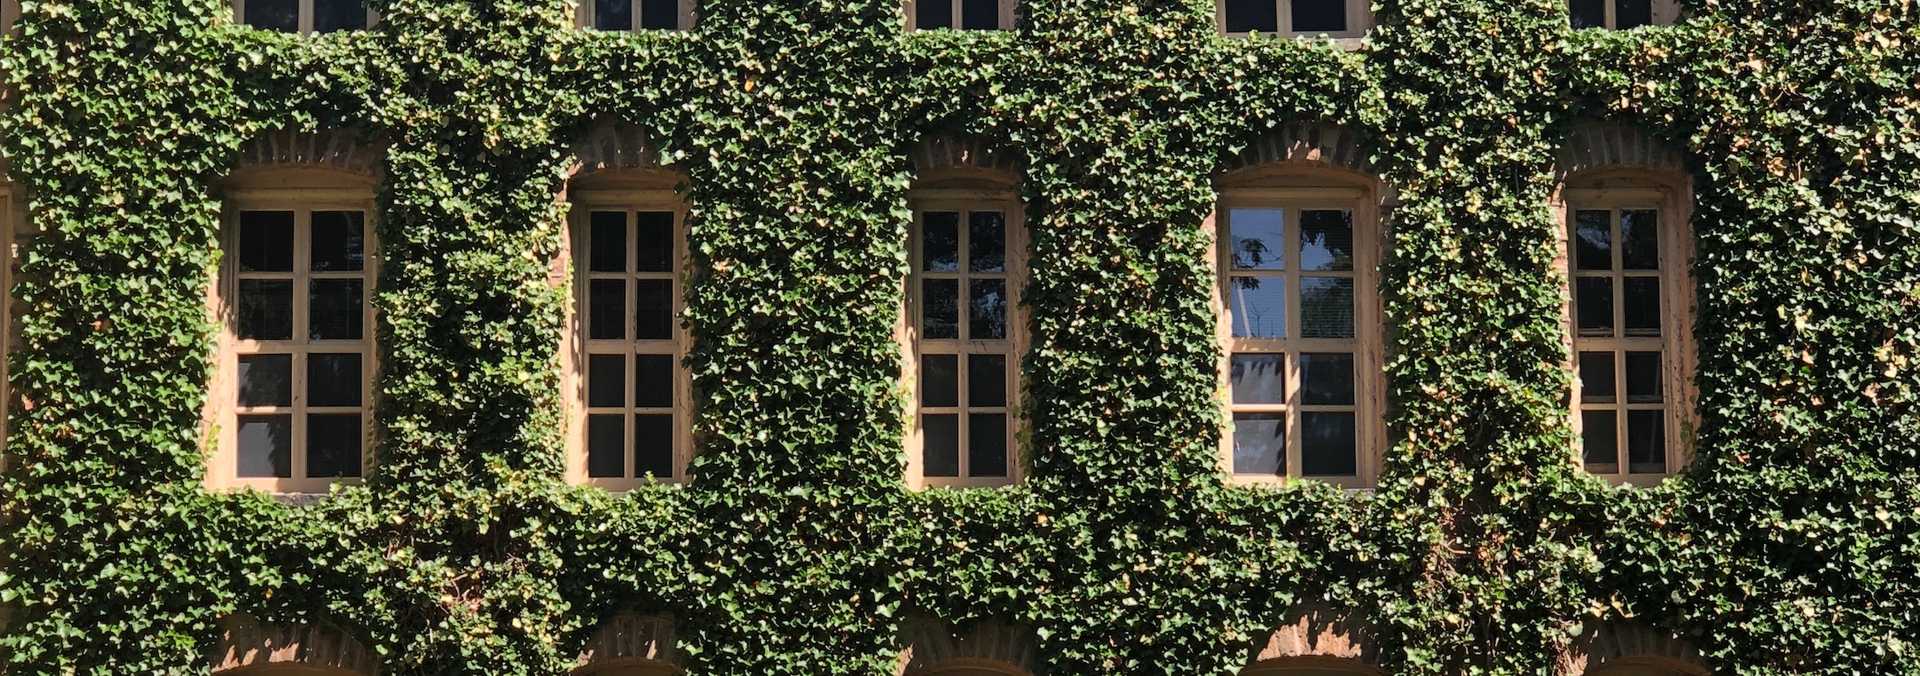 A building at Princeton University with ivy on the walls